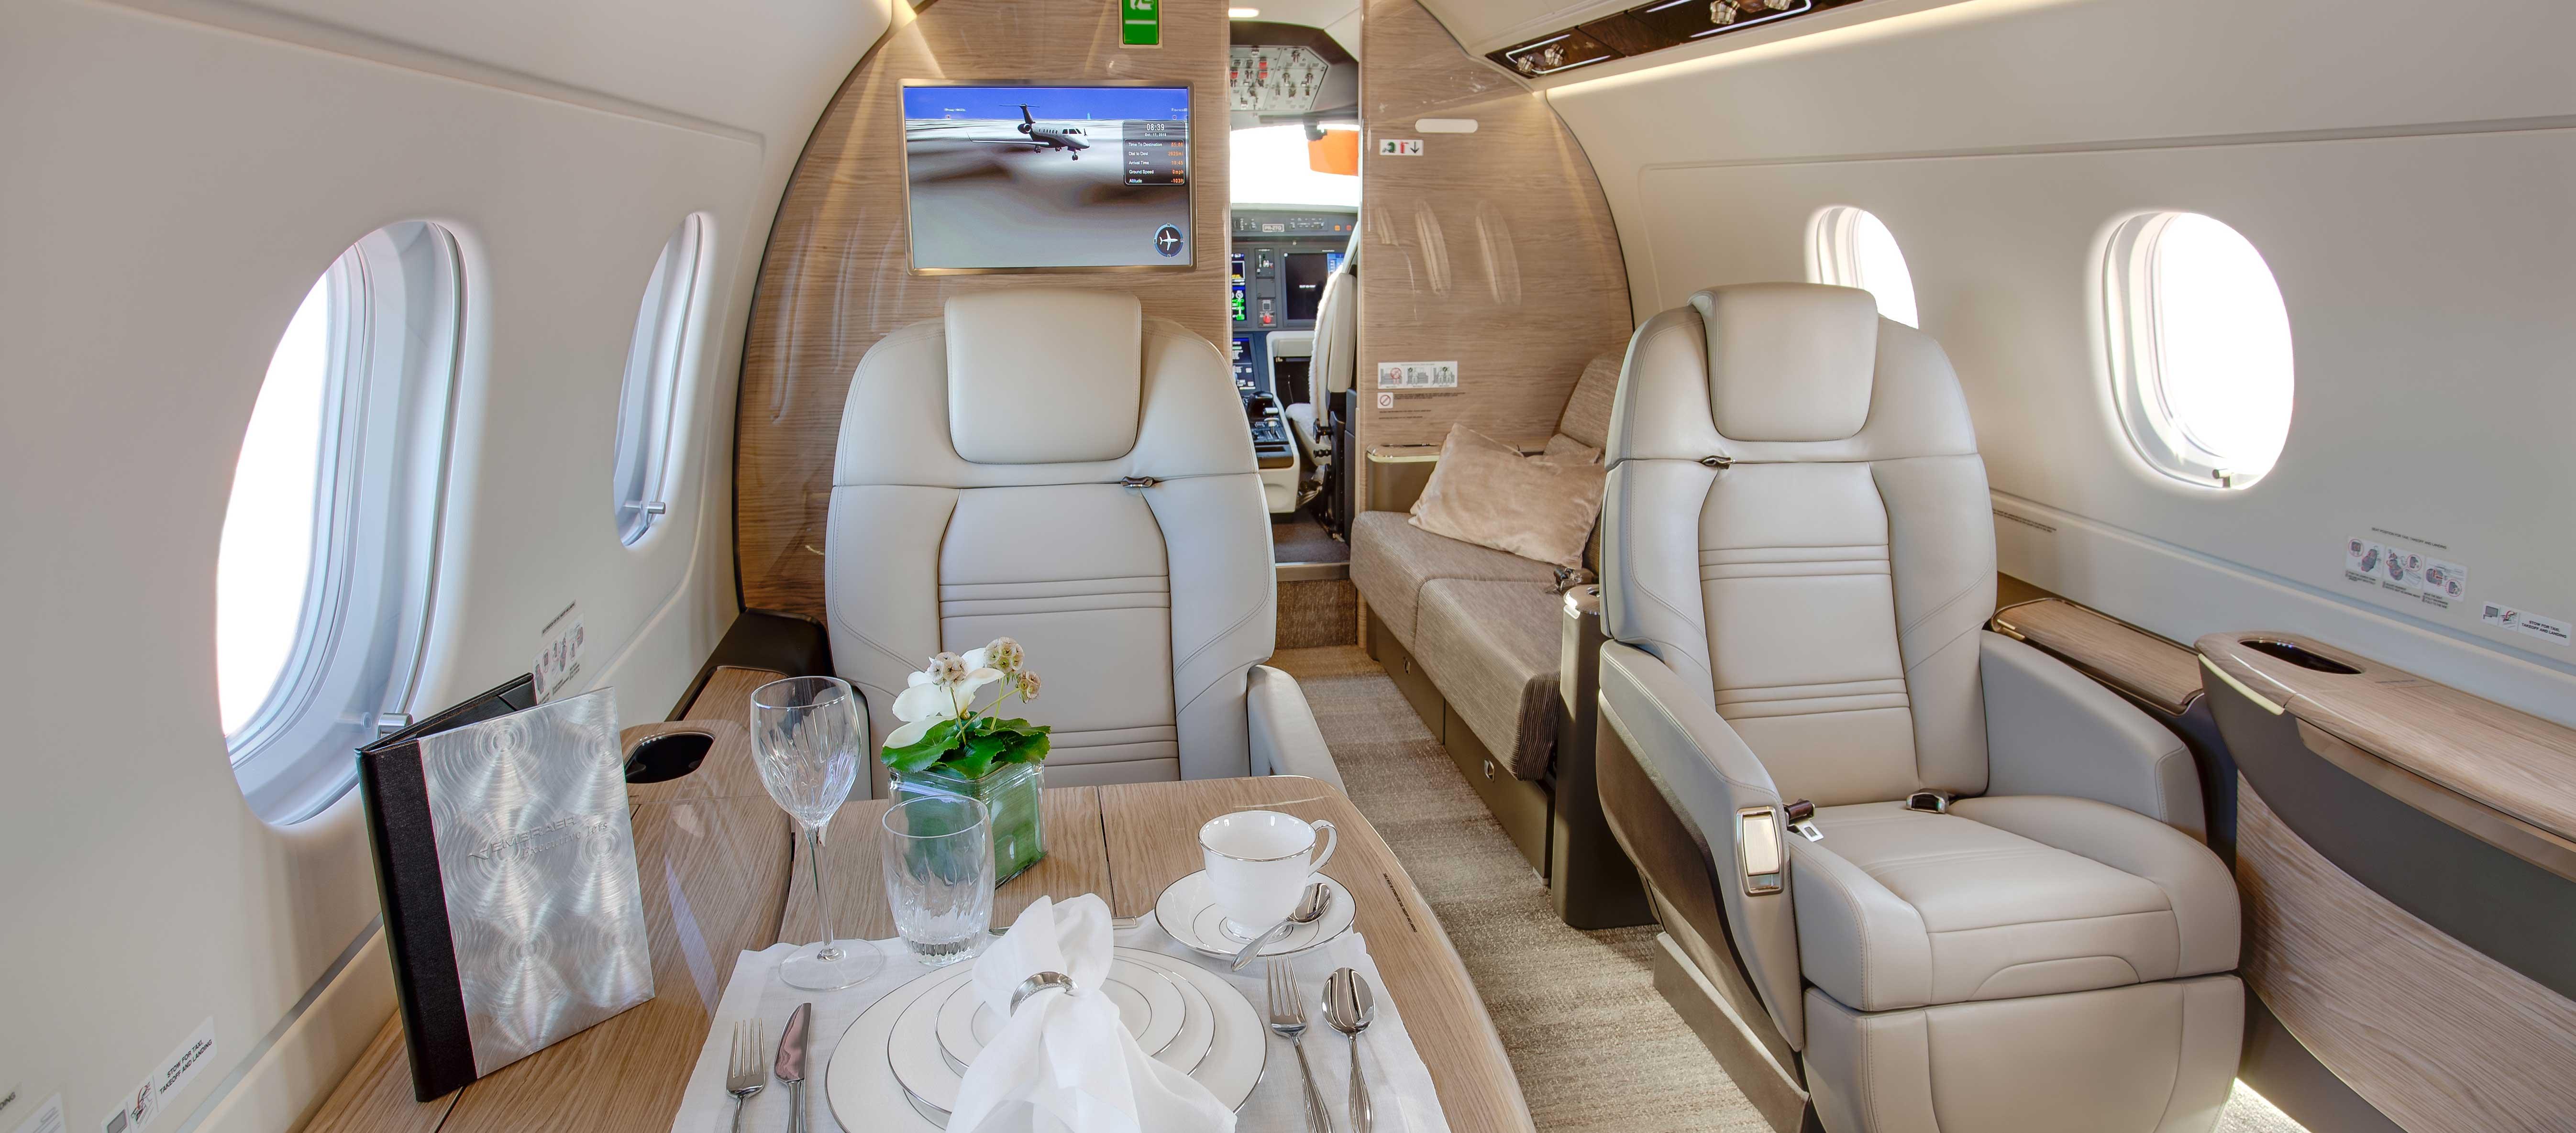 Embraer’s Praetor cabins employ recycled materials.